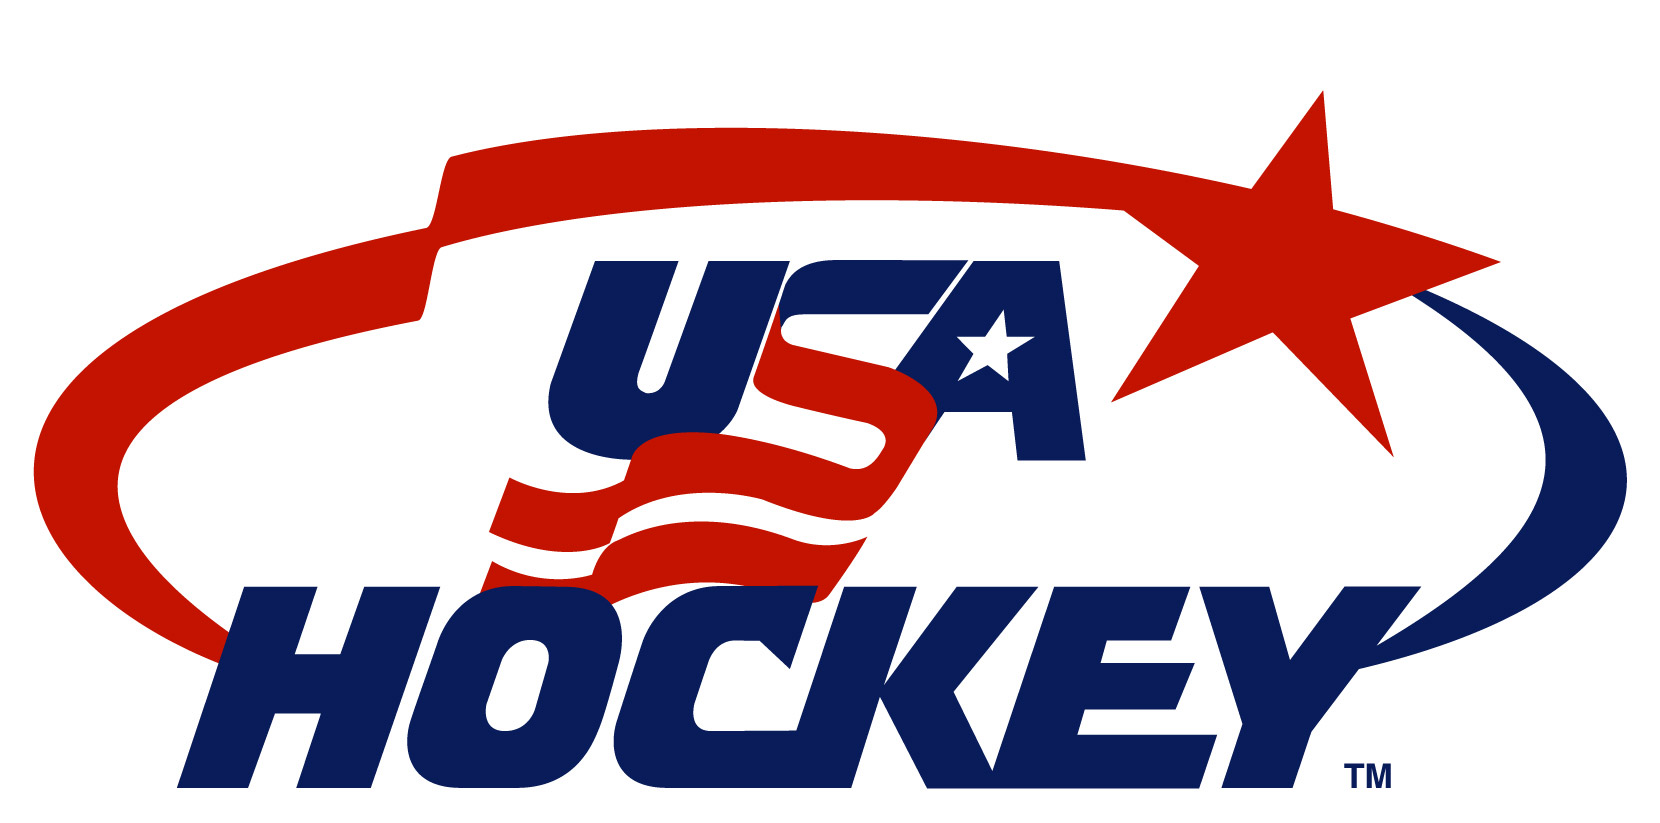 Did you watch the Olympic USA/Canada hockey game on Sunday night?